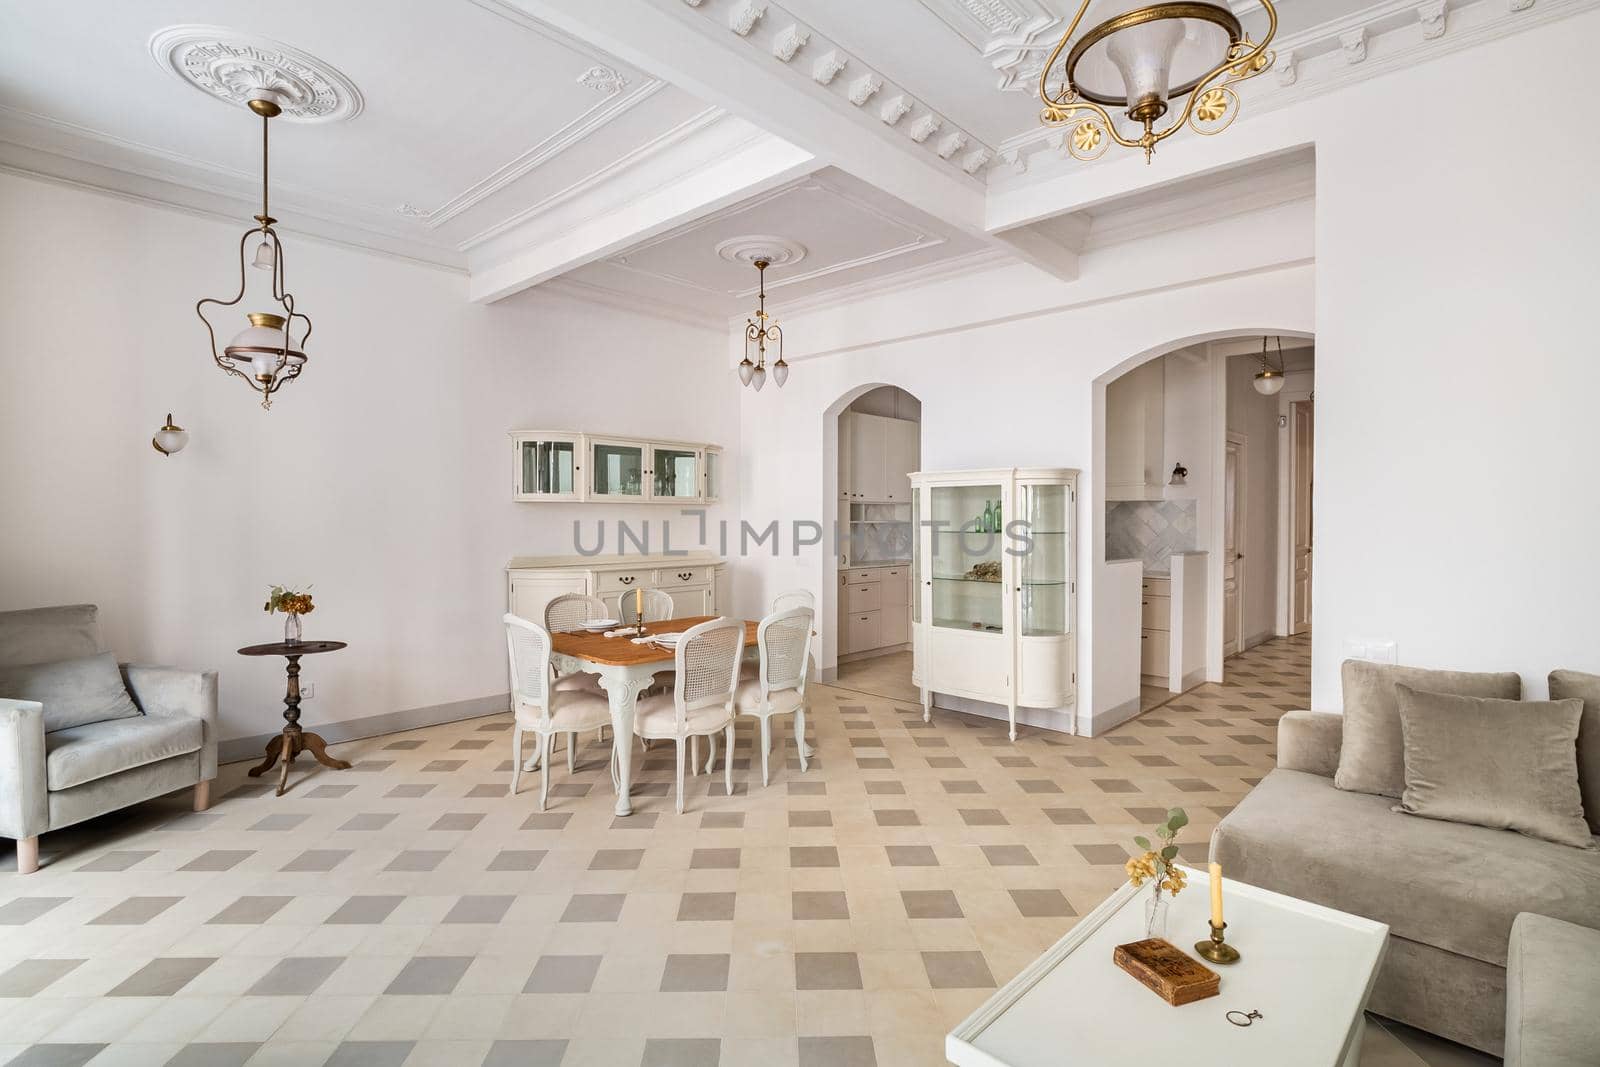 Classic room with dining table, served for two persons, tile floor, light walls, balconies and vintage elements of decoration. Beautiful bright interior.